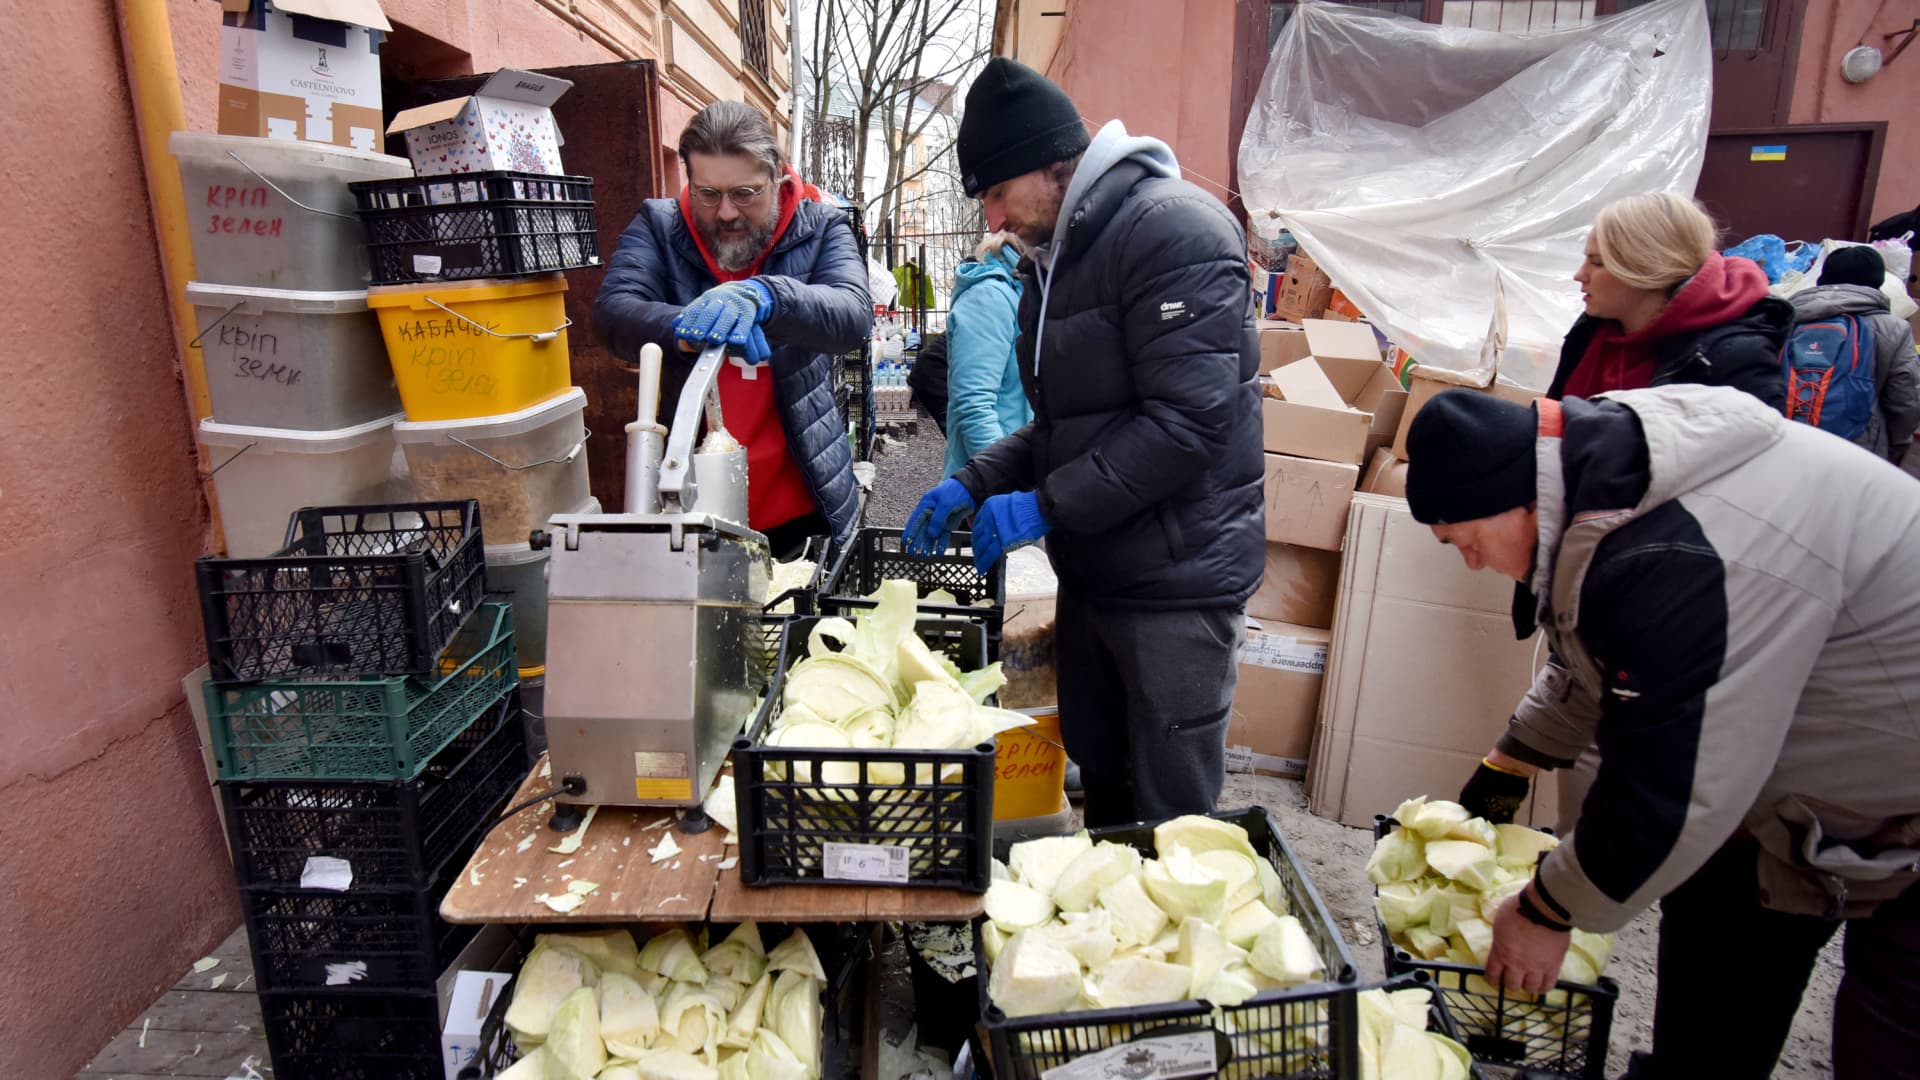 People from the Lviv Volunteer Kitchen prepare food and dry rations for the Ukrainian military on the front lines, amid Russia's invasion of Ukraine, in Lviv, Ukraine, March 9, 2022.